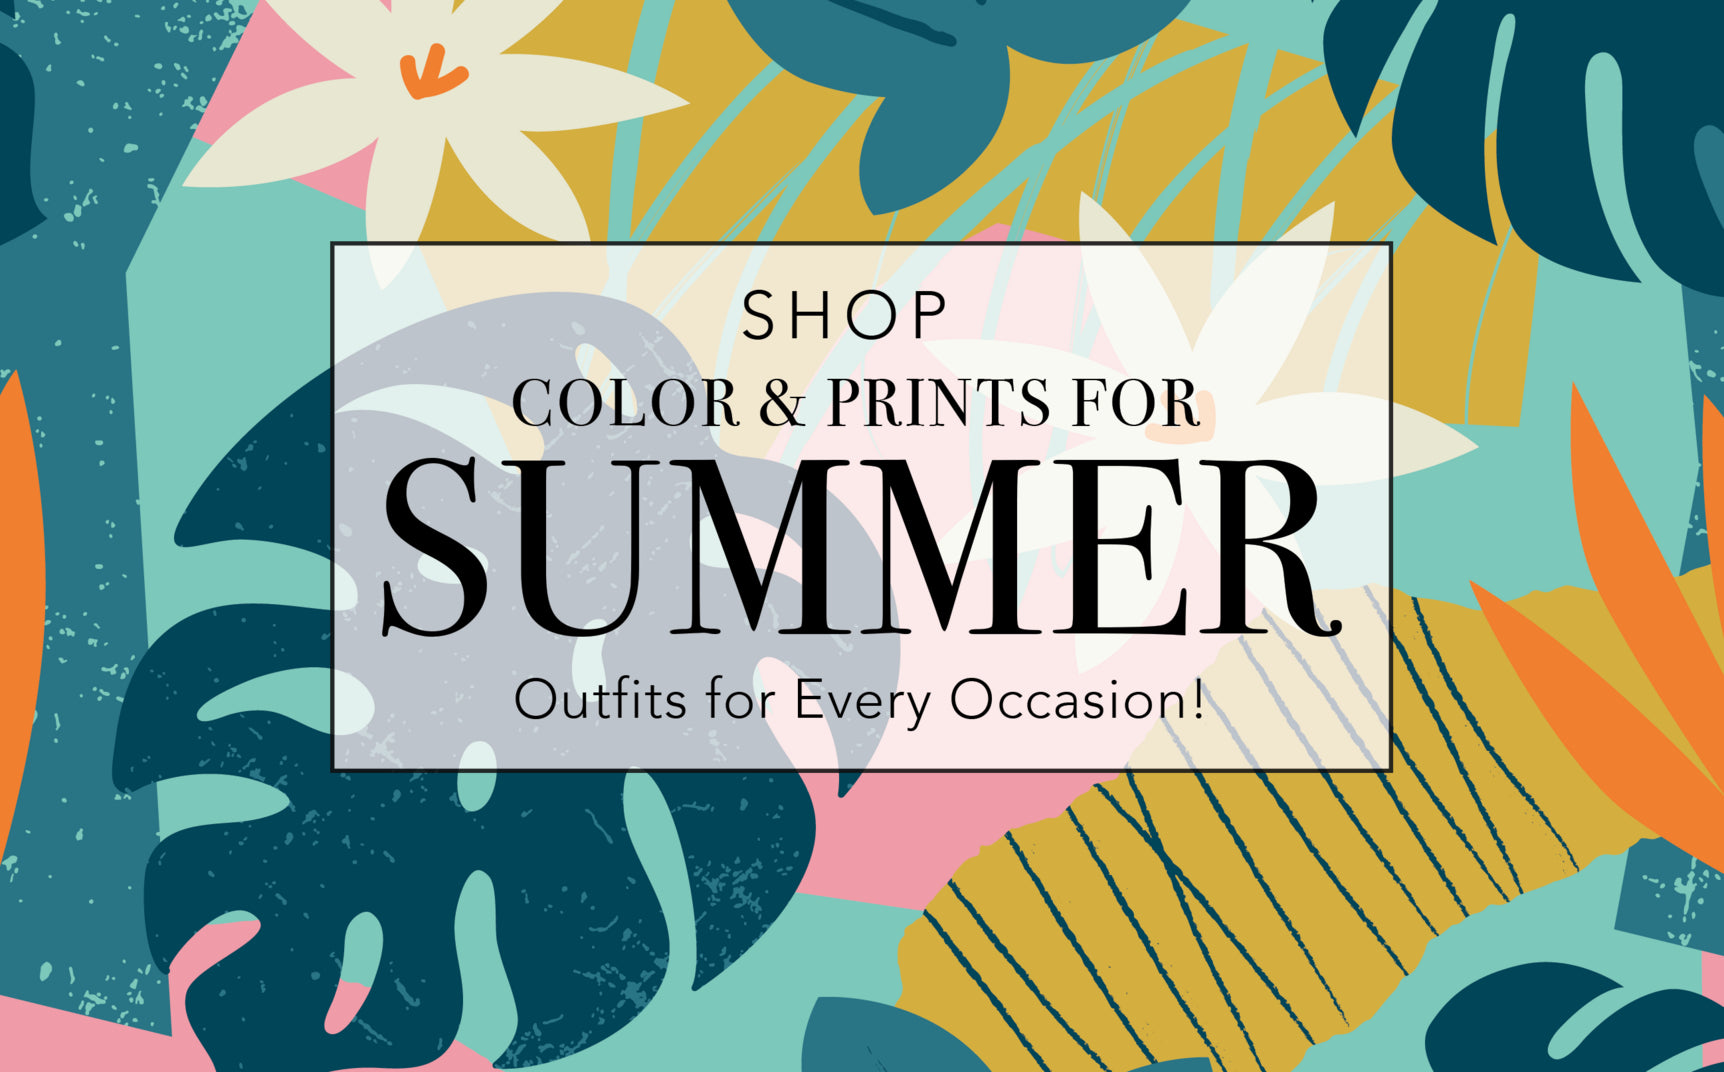 Fashion Boutique: Ladies Clothing-Dresses, Tops, Shorts & Skirts – Painted  Pink